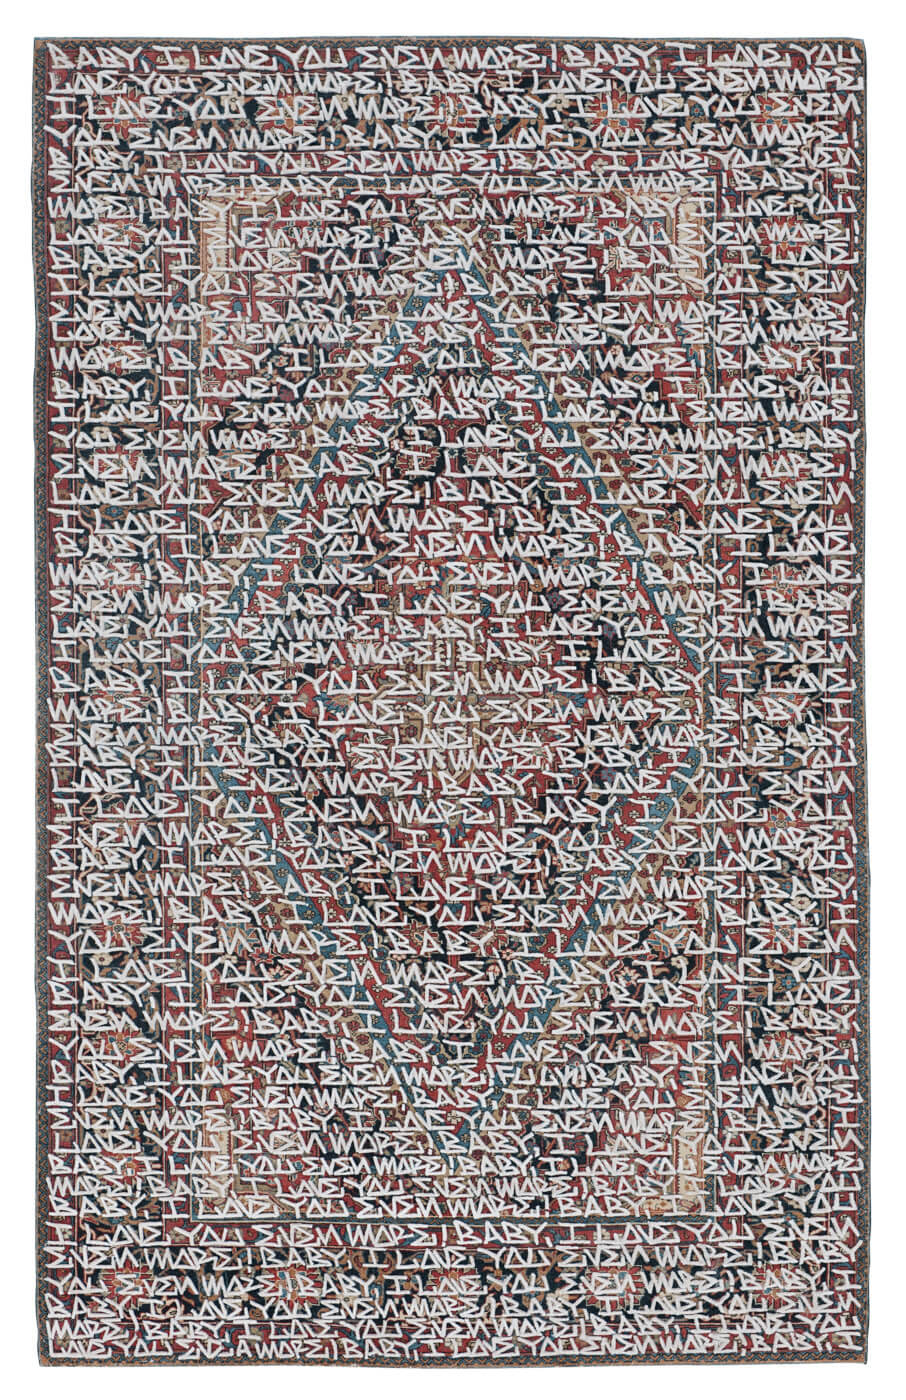 I Love You Hand-Woven Luxury Rug ☞ Size: 250 x 300 cm